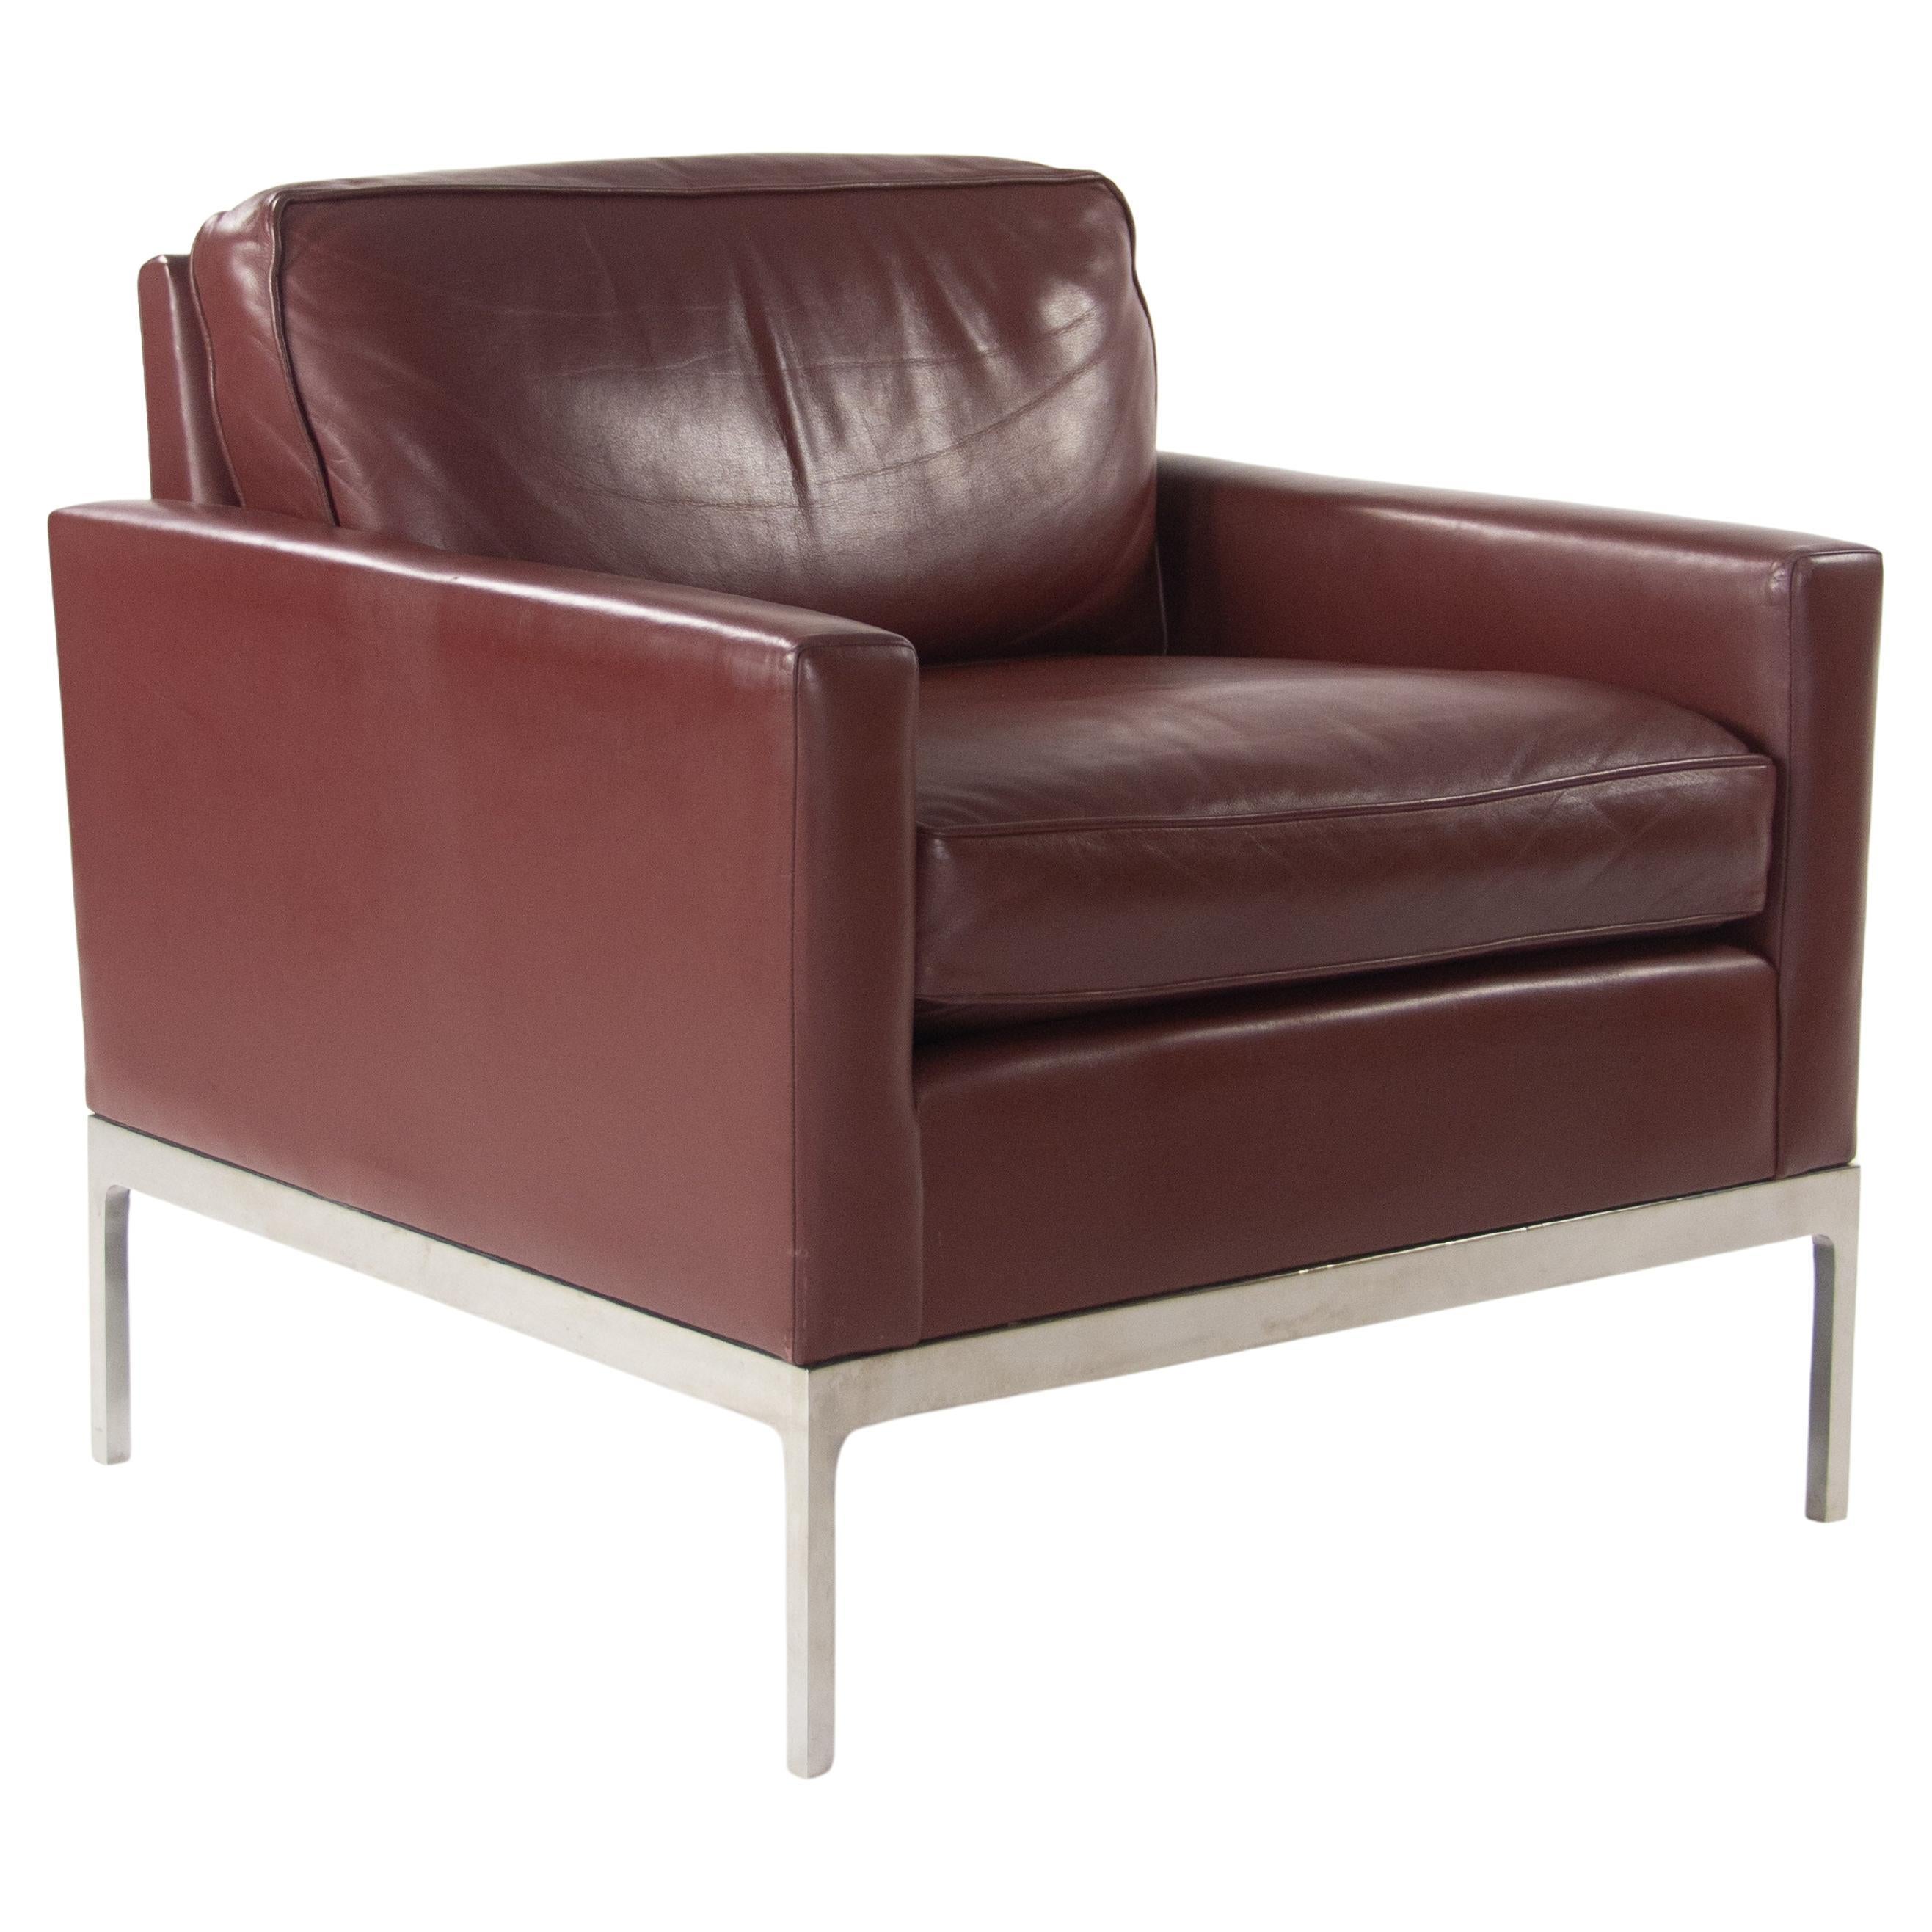 Nicos Zographos Red Leather 70 Club Chair Armchair with Polished Stainless Legs For Sale